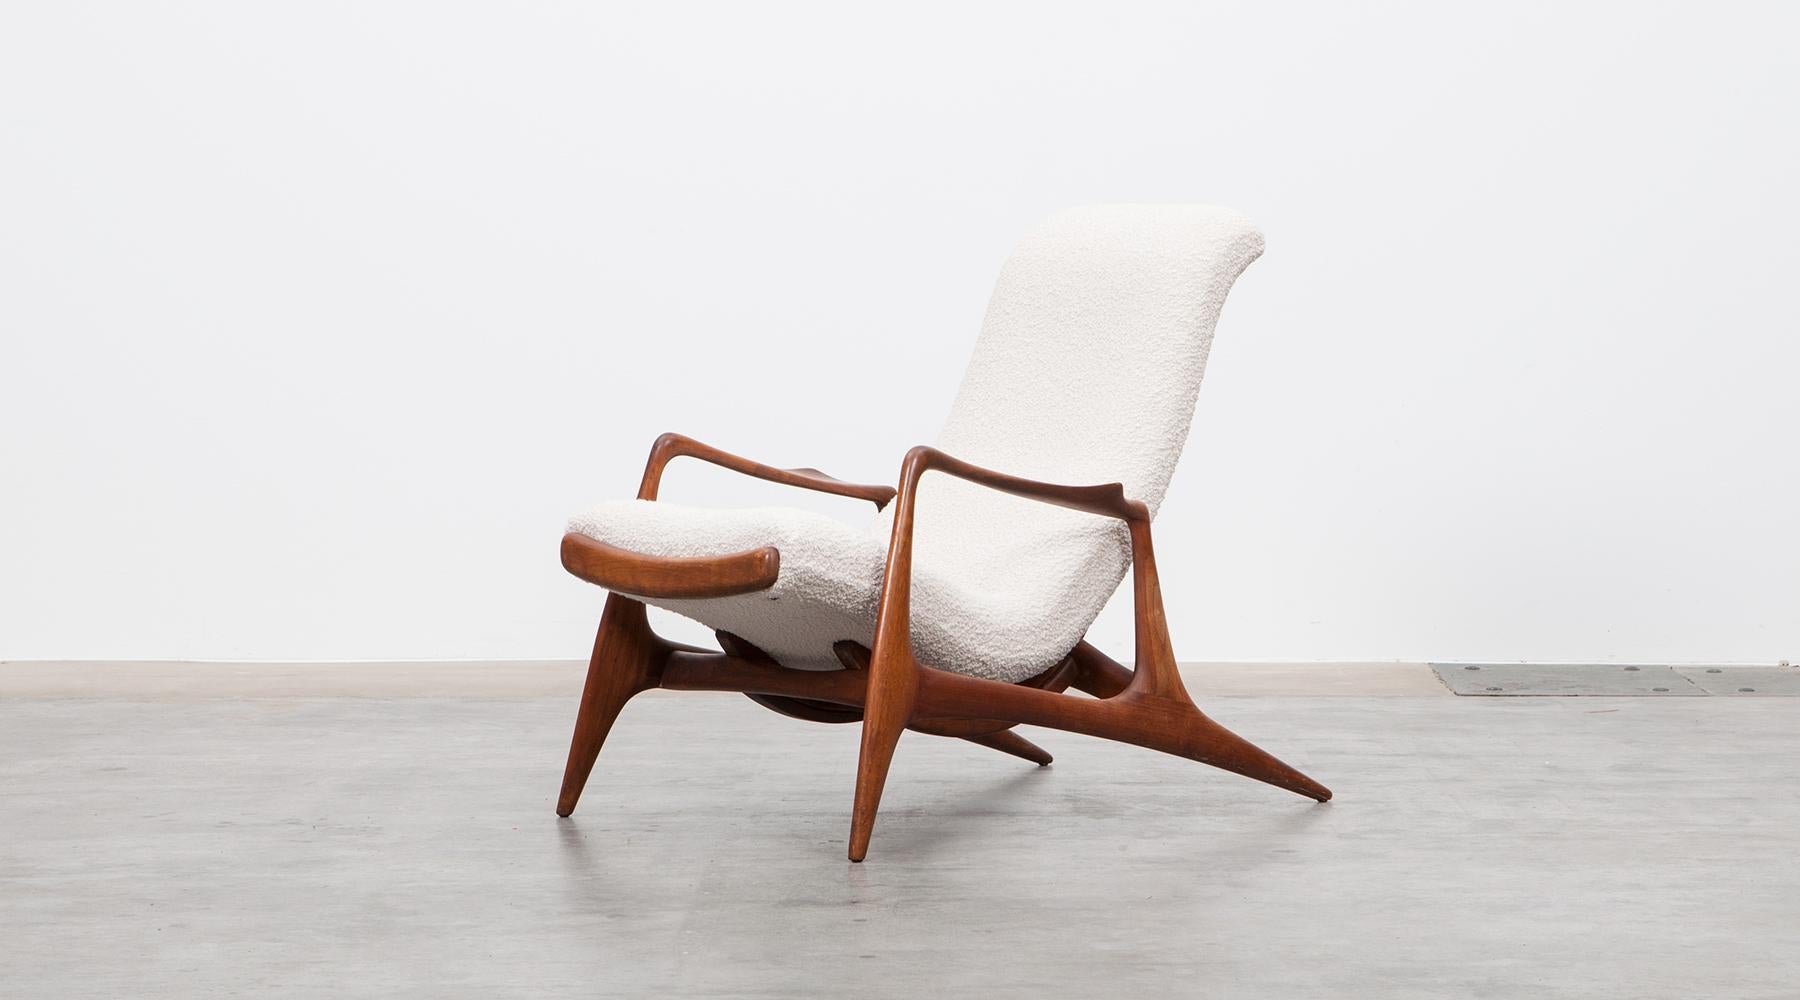 Lounge chair in teak, new upholstery, USA, 1956.

The design of the multi-position reclining chair was as fluid as its reclining movement. The sweeping organic lines and shapes are inspired by leaves and arboreal forms. The chair has a pull-out